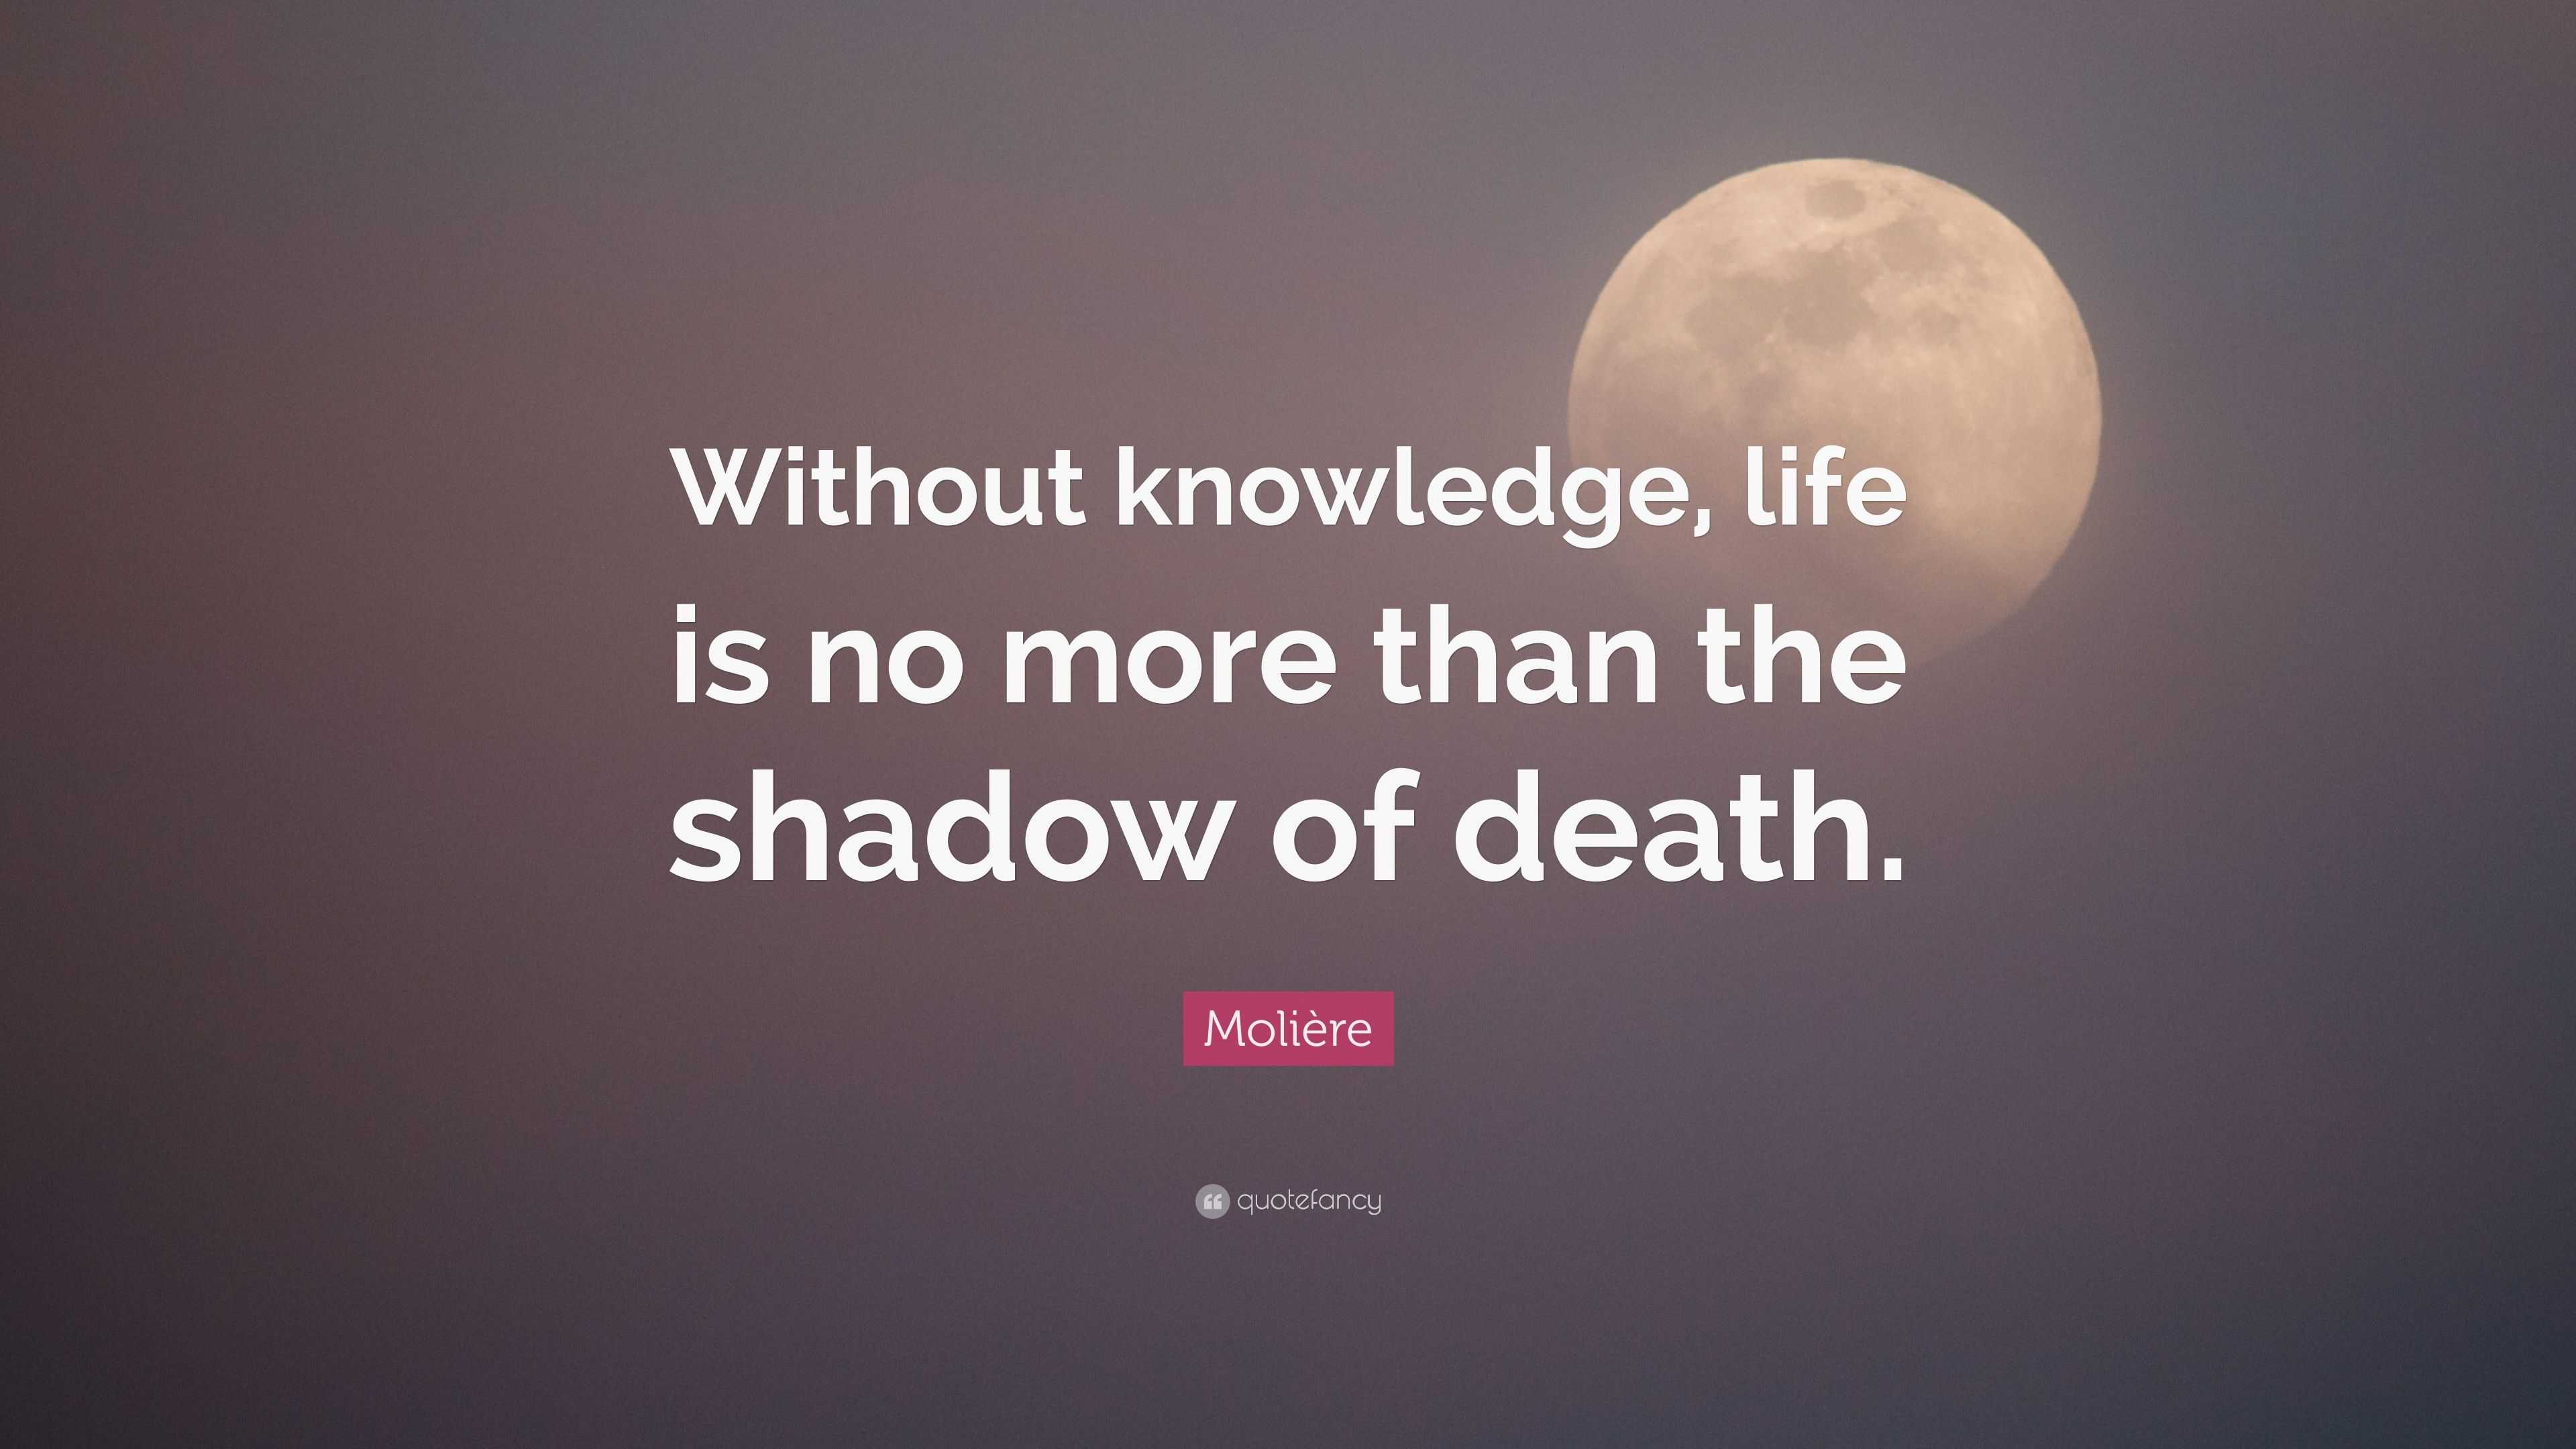 Molière Quote: “Without knowledge, life is no more than the shadow of ...